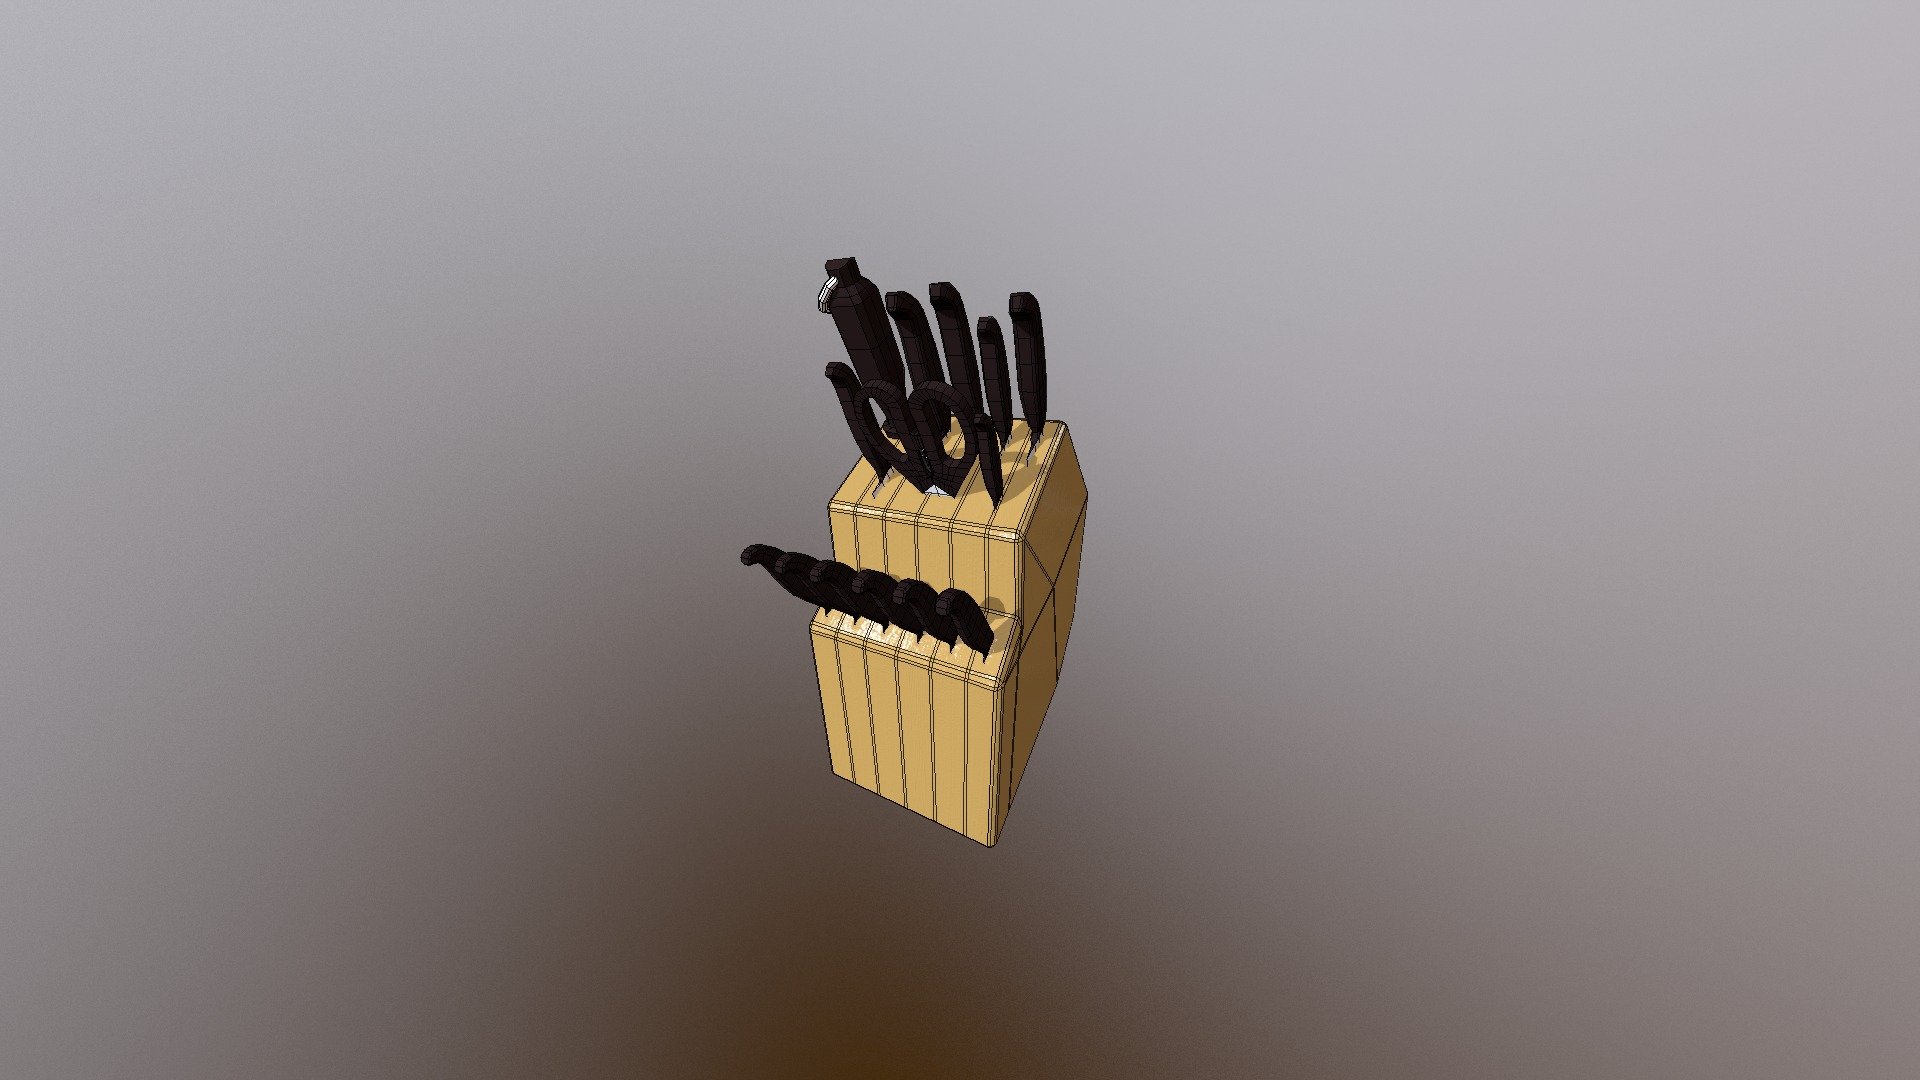 Part of a large Kitchen Clutter set that's being worked on. This is a knife set.
Includes: 
Knife Block &ndash; Six Steak Knives &ndash; Honing Steel &ndash; Kitchen Shears 
Bread Knife &ndash; Carving Knife &ndash; Utility Knife
Santoku Knife &ndash; Paring Knife &ndash; Chef Knife



Respective Polygons: 
Block: 516
Steak Knife: 168 (each)
Honing Steel: 3896 (total)
Shears: 5220 (total) 
Bread: 409
Carving: 185
Utility: 142
Santoku: 142
Chef: 142
Paring: 142



Available for purchase: https://www.renderhub.com/potentialfate - [potentialfate] Kitchen Clutter Knife Set - 3D model by potentialfate 3d model